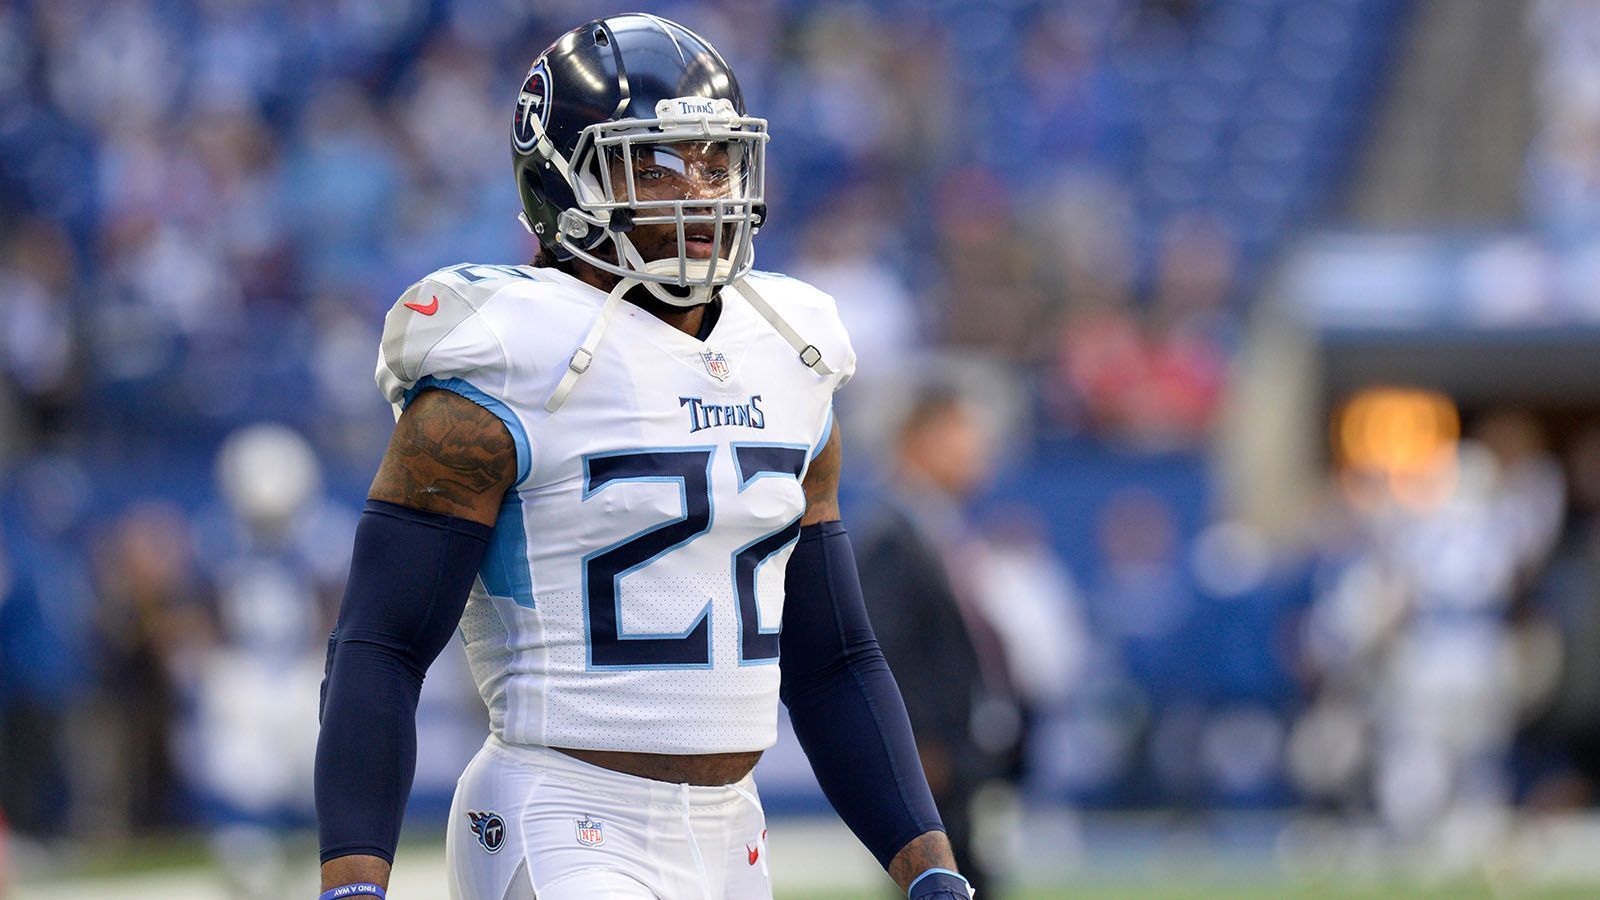 
                <strong>1. Platz: Derrick Henry</strong><br>
                &#x2022; Team: Tennessee Titans<br>&#x2022; Position: Running Back<br>&#x2022; <strong>Overall Rating: 97</strong><br>&#x2022; Key Stats: Speed 93 - Acceleration 86 - Agility 85<br>
              